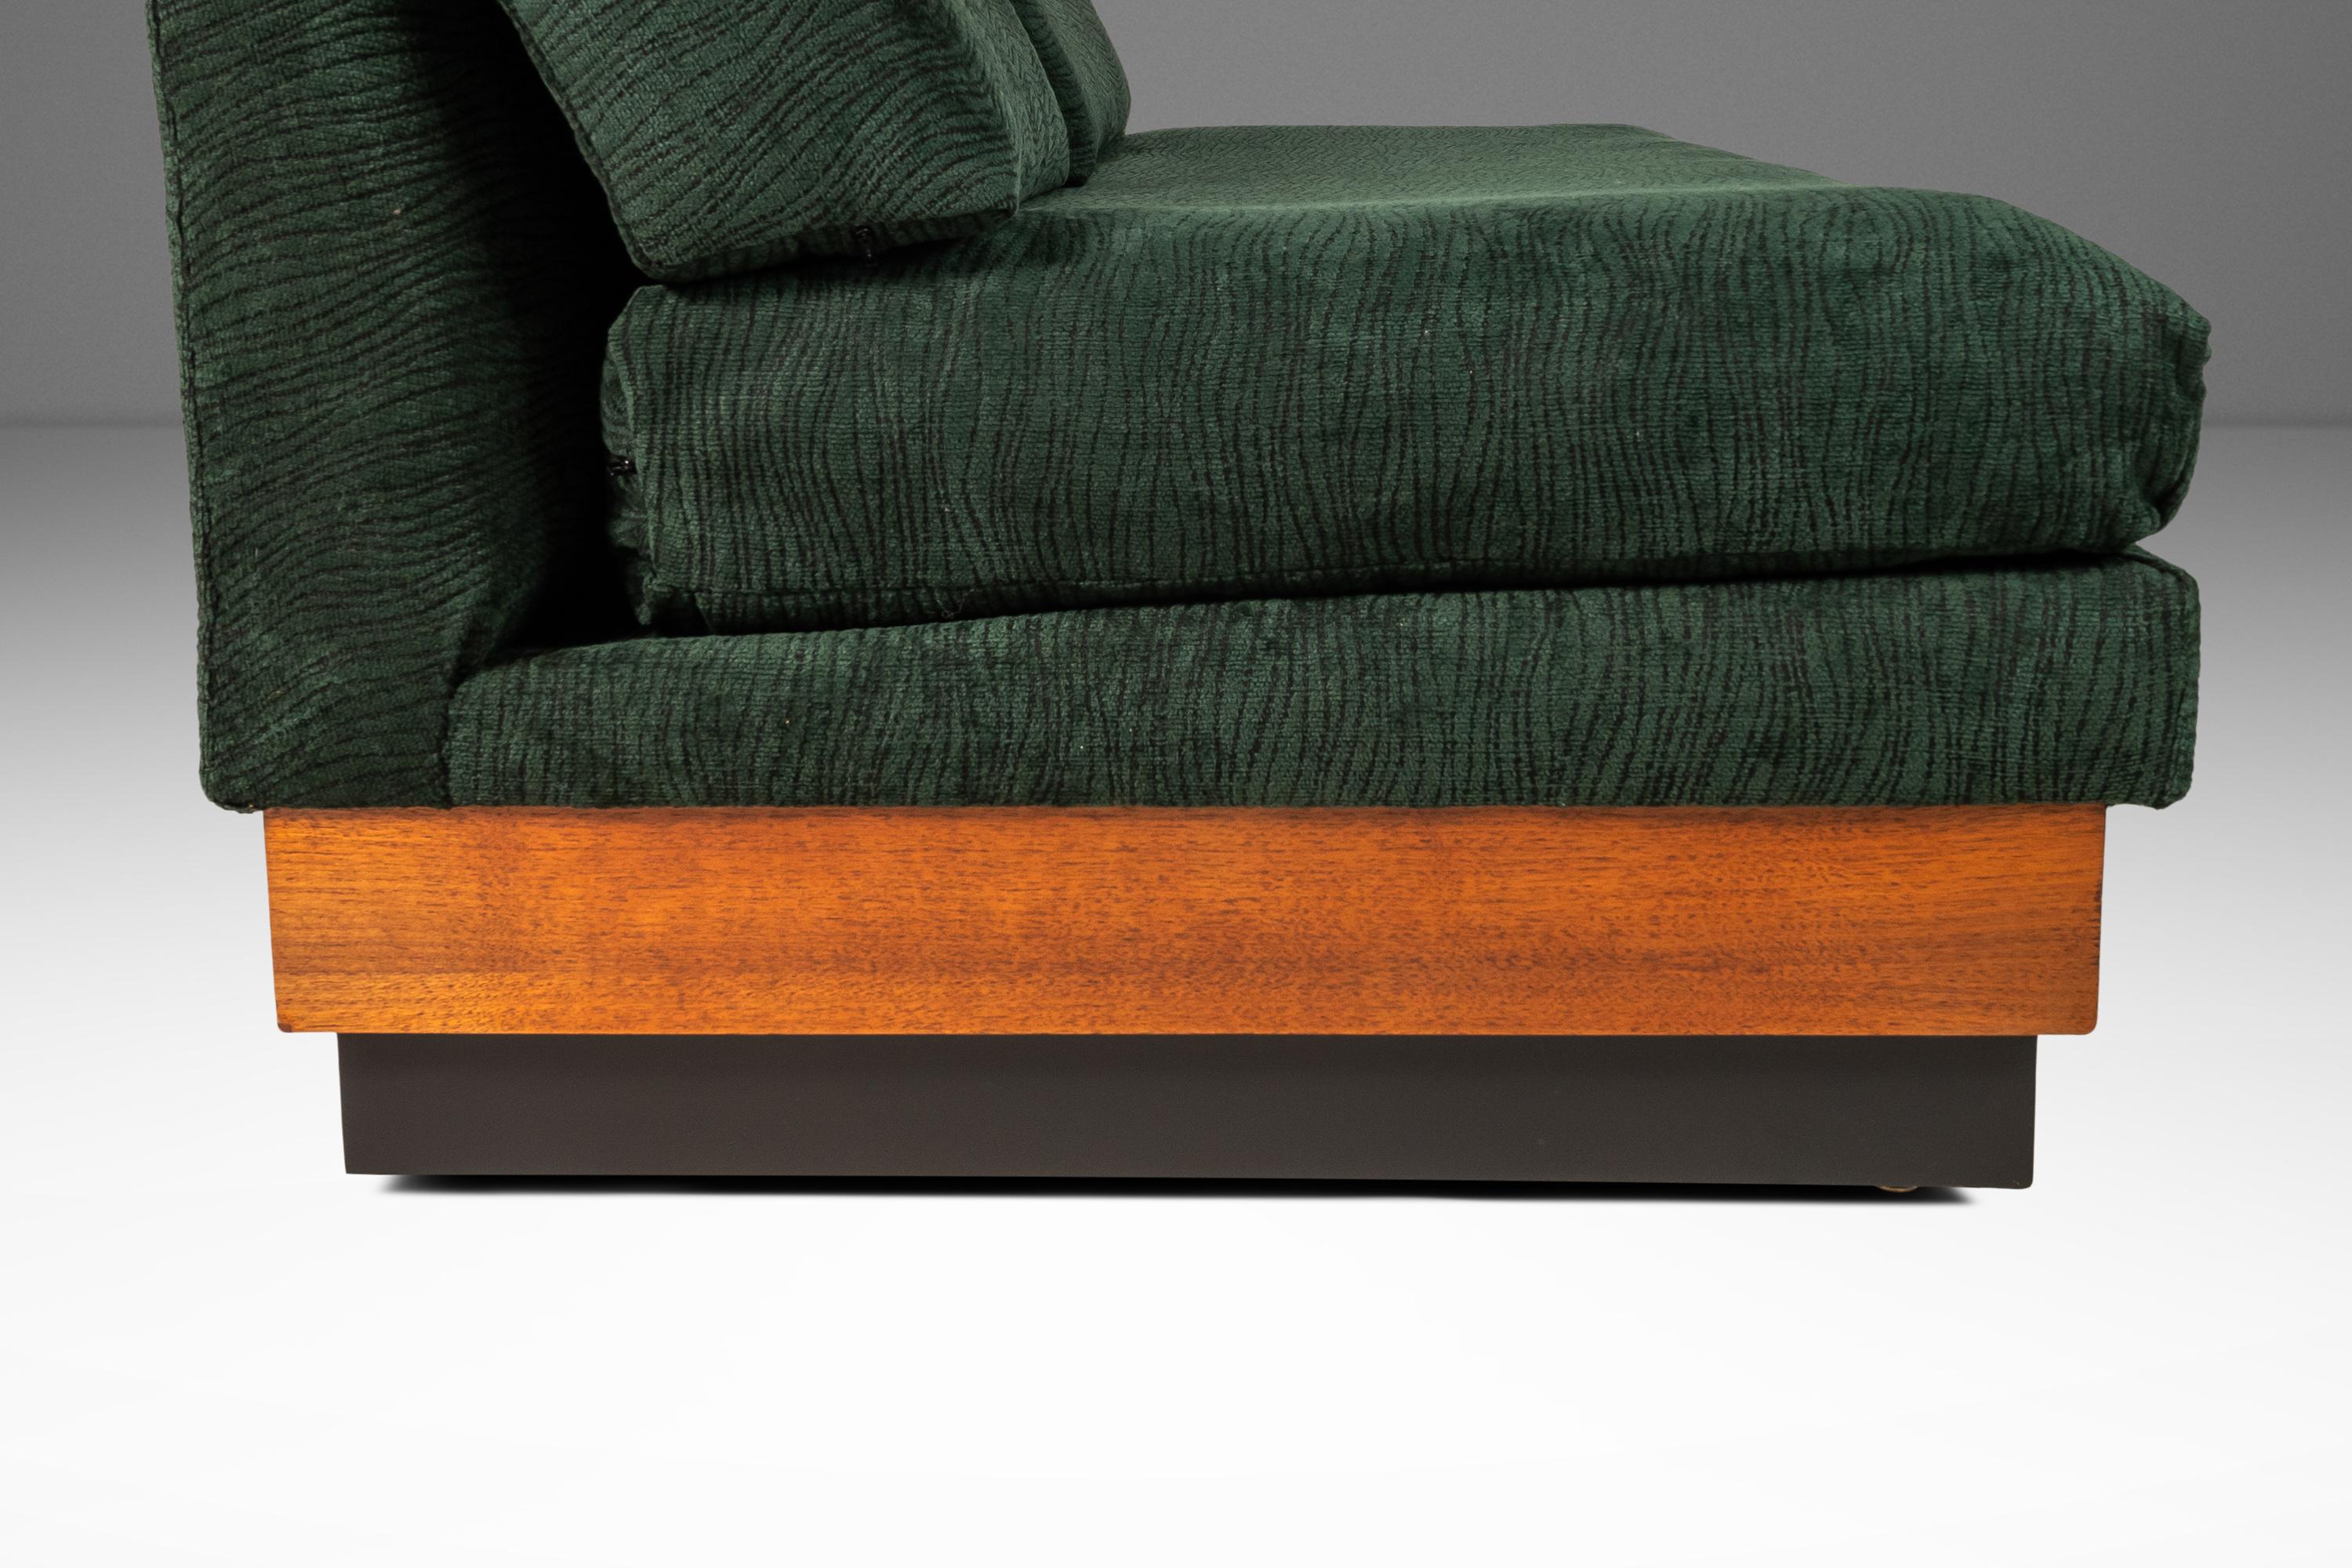 Platform Loveseat Sofa in Walnut by Adrian Pearsall for Craft Associates, 1960's For Sale 12